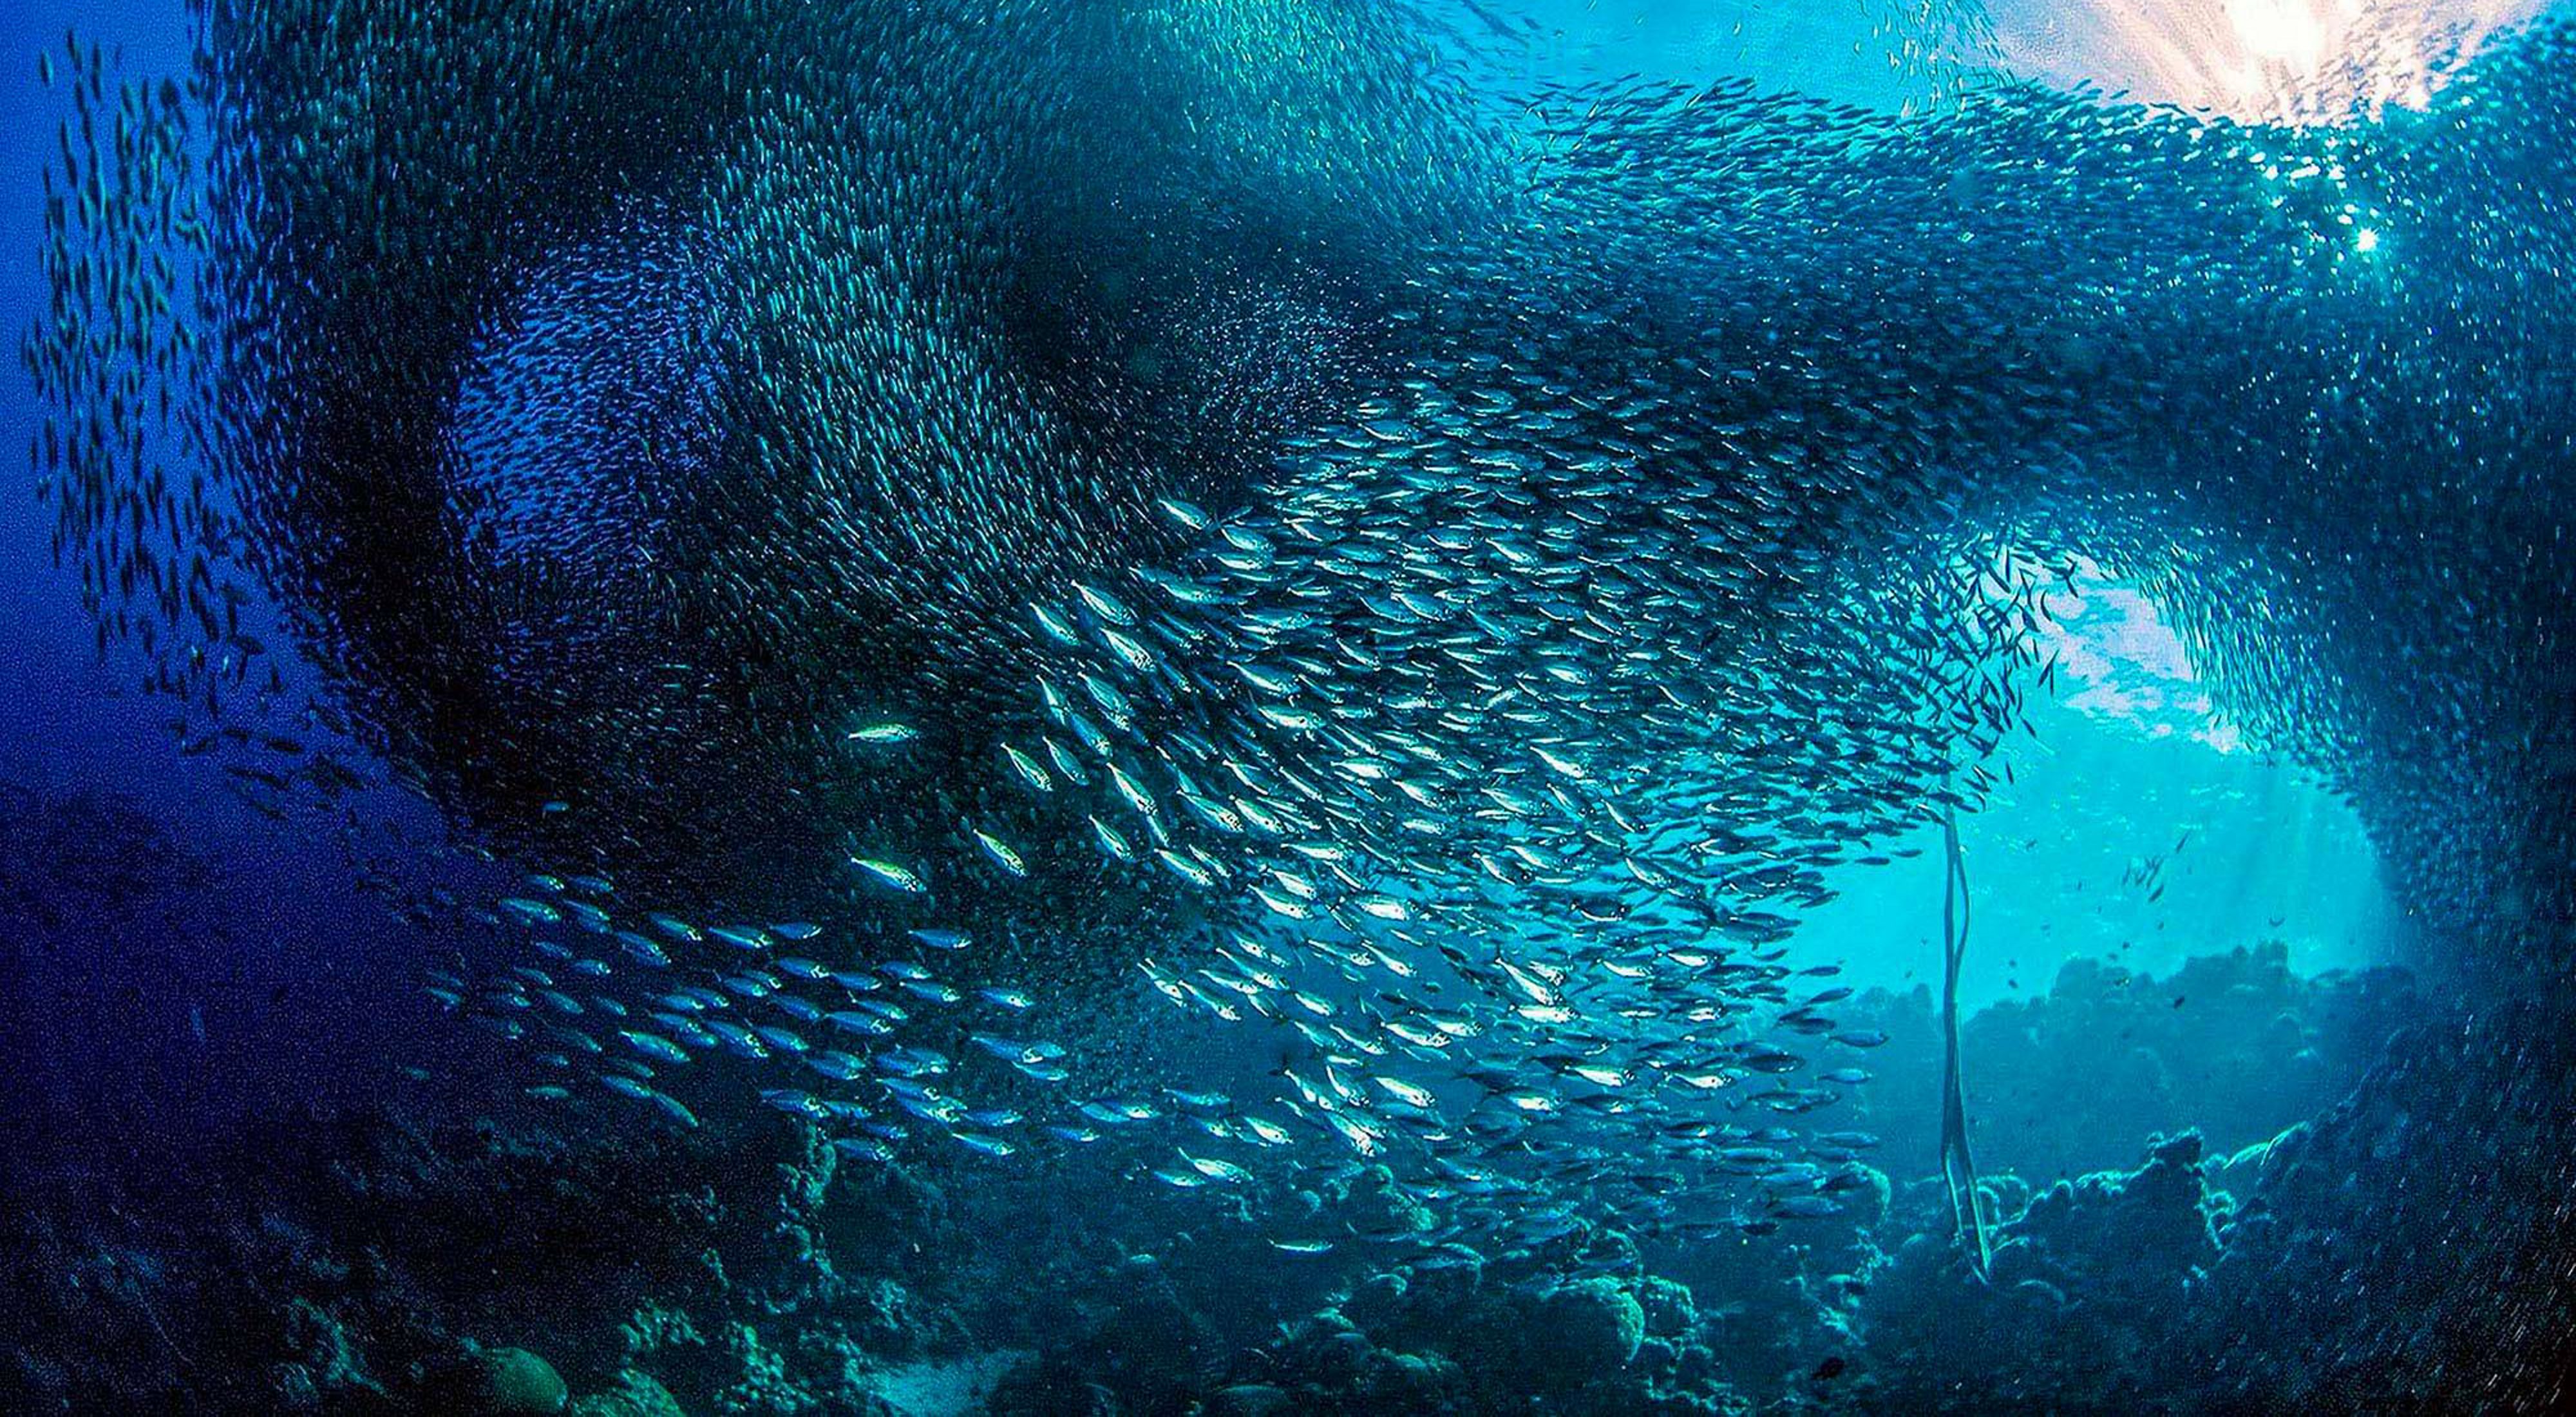 A gigantic school of sardines move in unison along the reefs of the island of Cebu, Philippines.